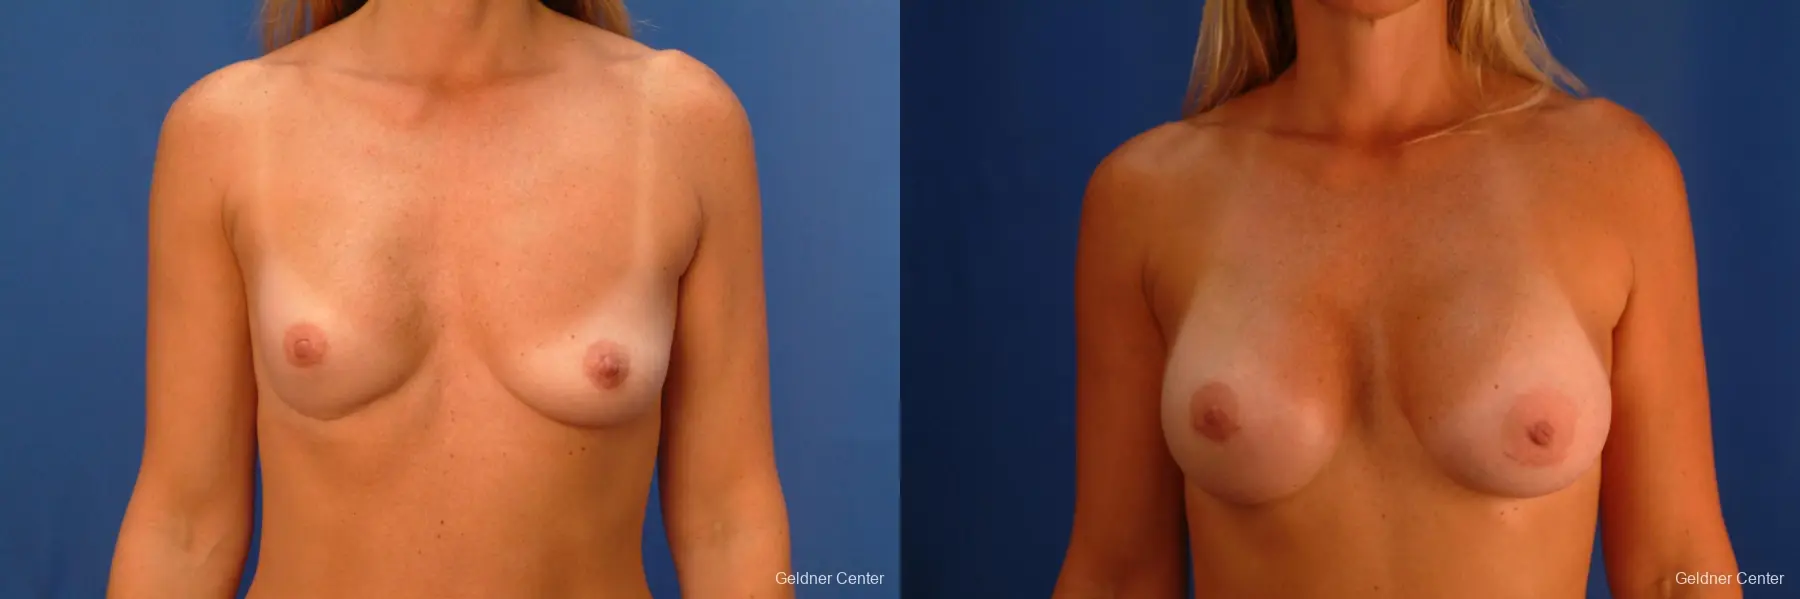 Breast Augmentation Lake Shore Dr, Chicago 2418 - Before and After 1